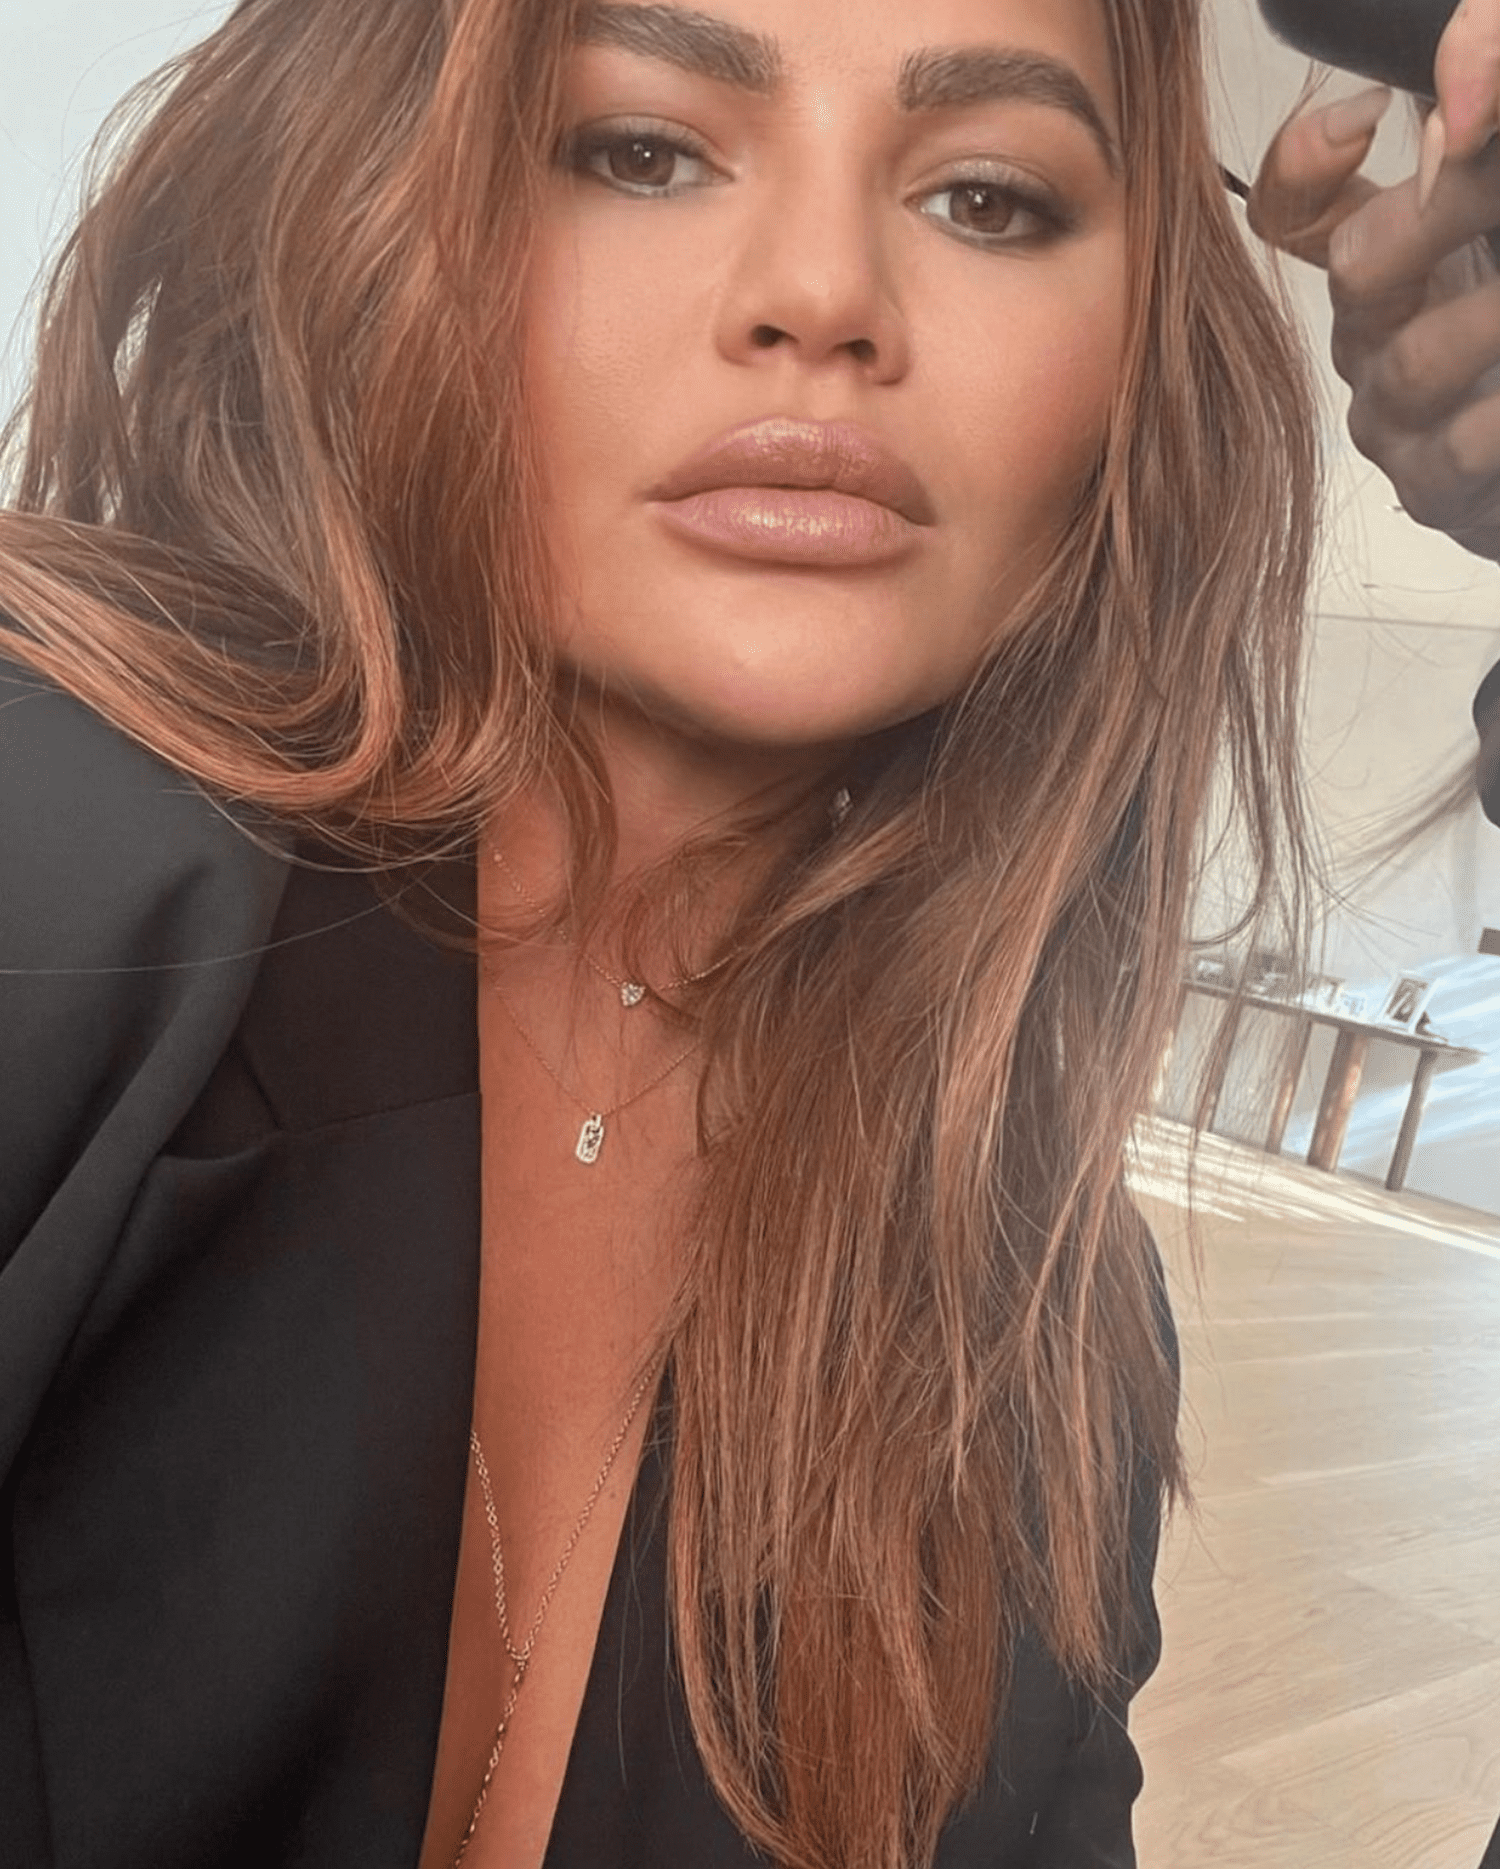 CHRISSY TEIGEN GETS HER HAIR DONE AND TAKES A SELFIE